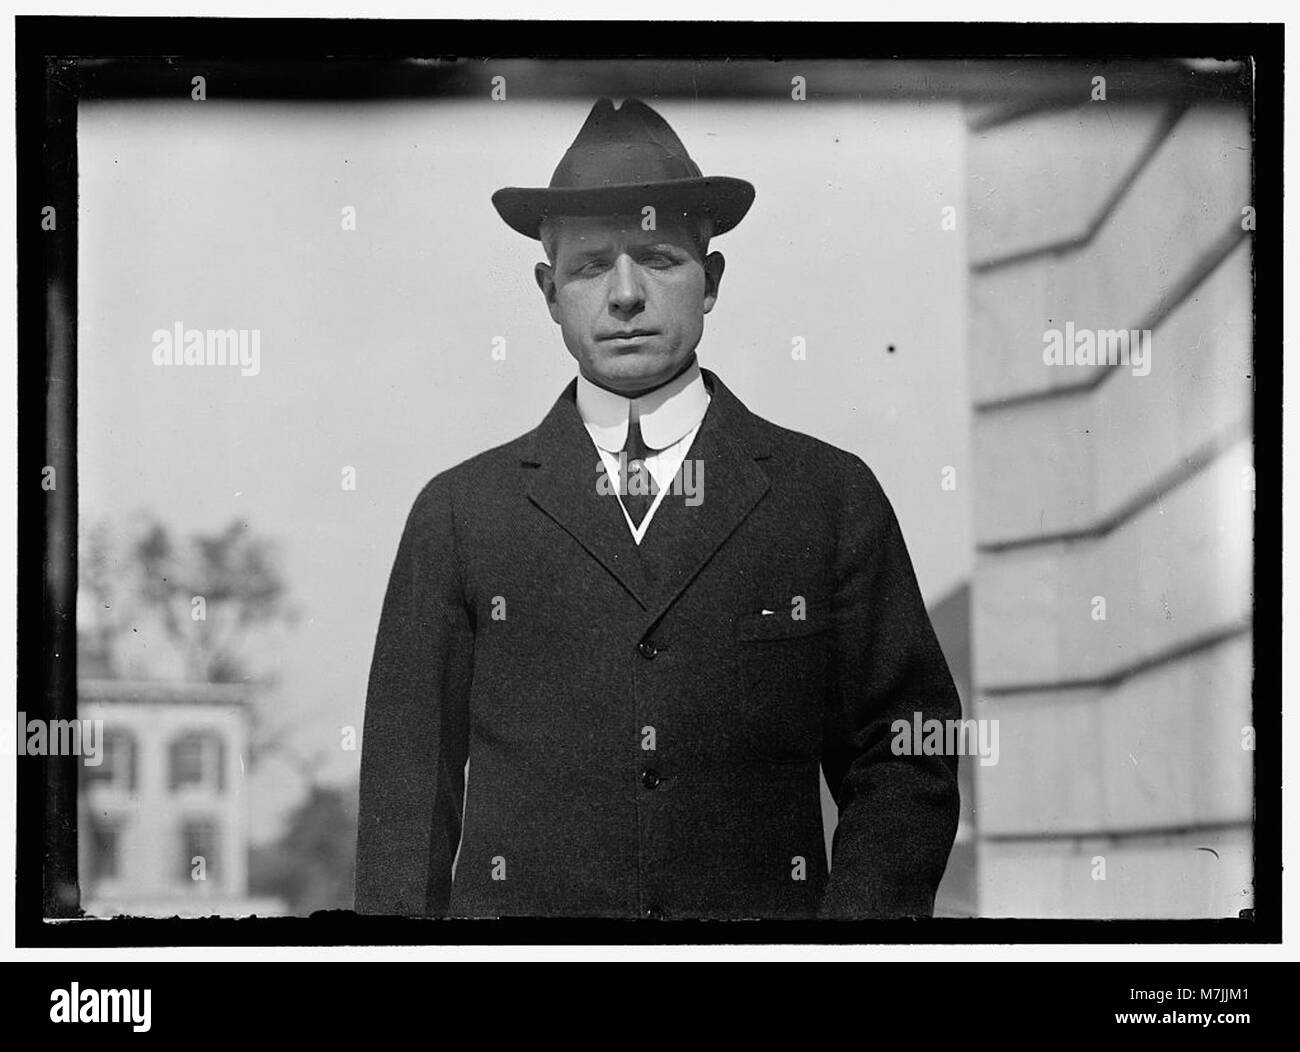 HILLES, CHARLES DEWEY. CHAIRMAN, REPUBLICAN NATIONAL COMMITTEE, 1912-. SECRETARY TO PRESIDENT TAFT, 1911-1913. REPUBLICAN NATIONAL COMMITTEE, CHAIRMAN LCCN2016867175 Stock Photo